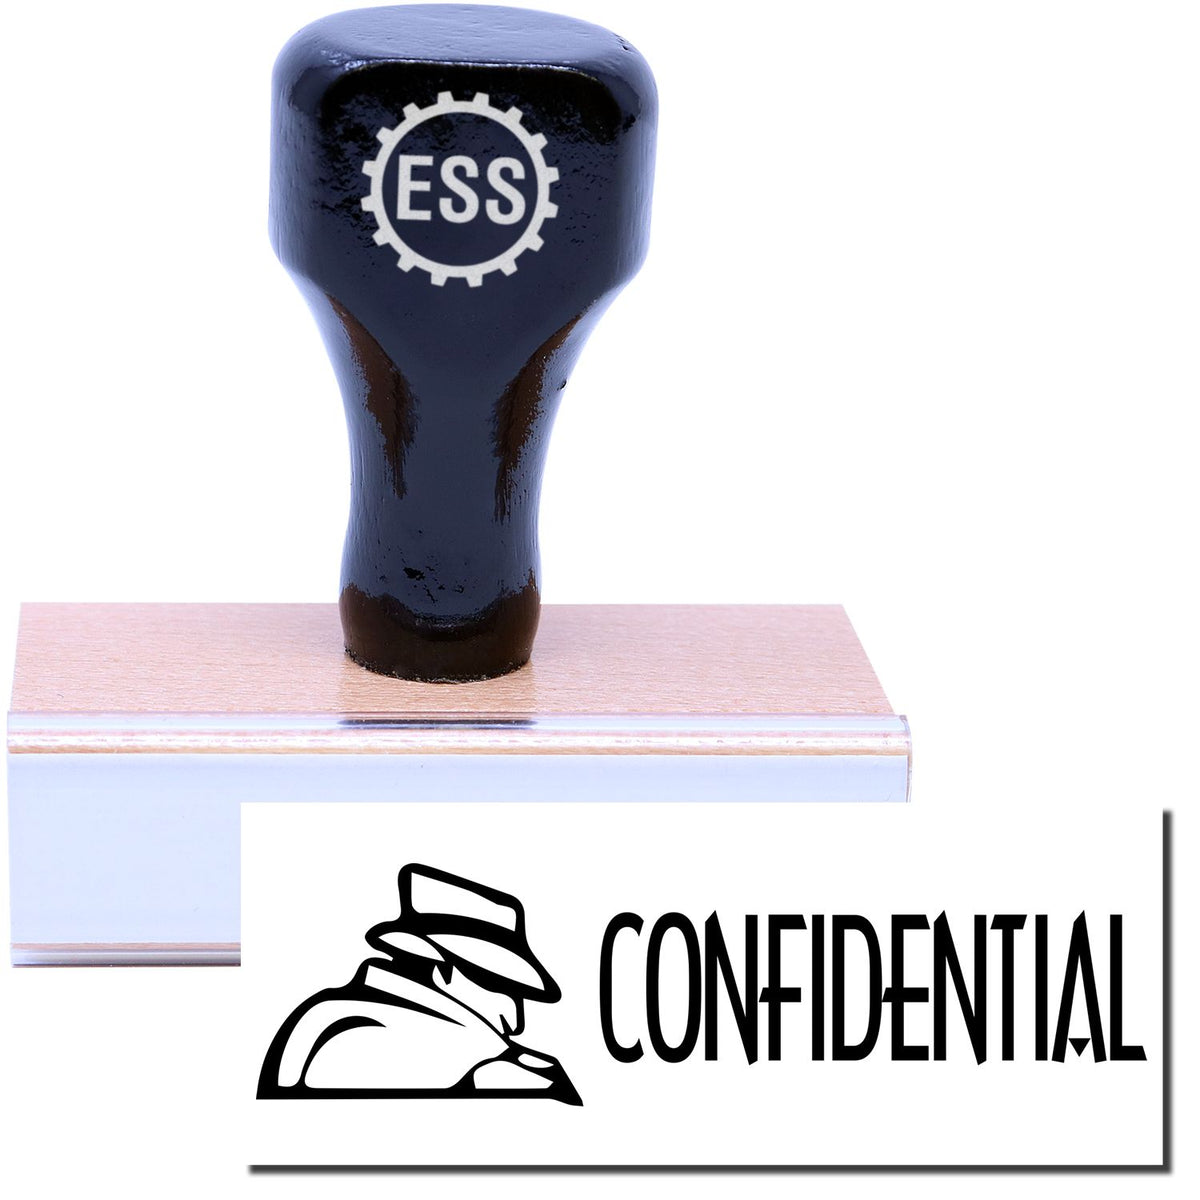 A stock office rubber stamp with a stamped image showing how the text &quot;CONFIDENTIAL&quot; with an eye-catching logo on the left side is displayed after stamping.